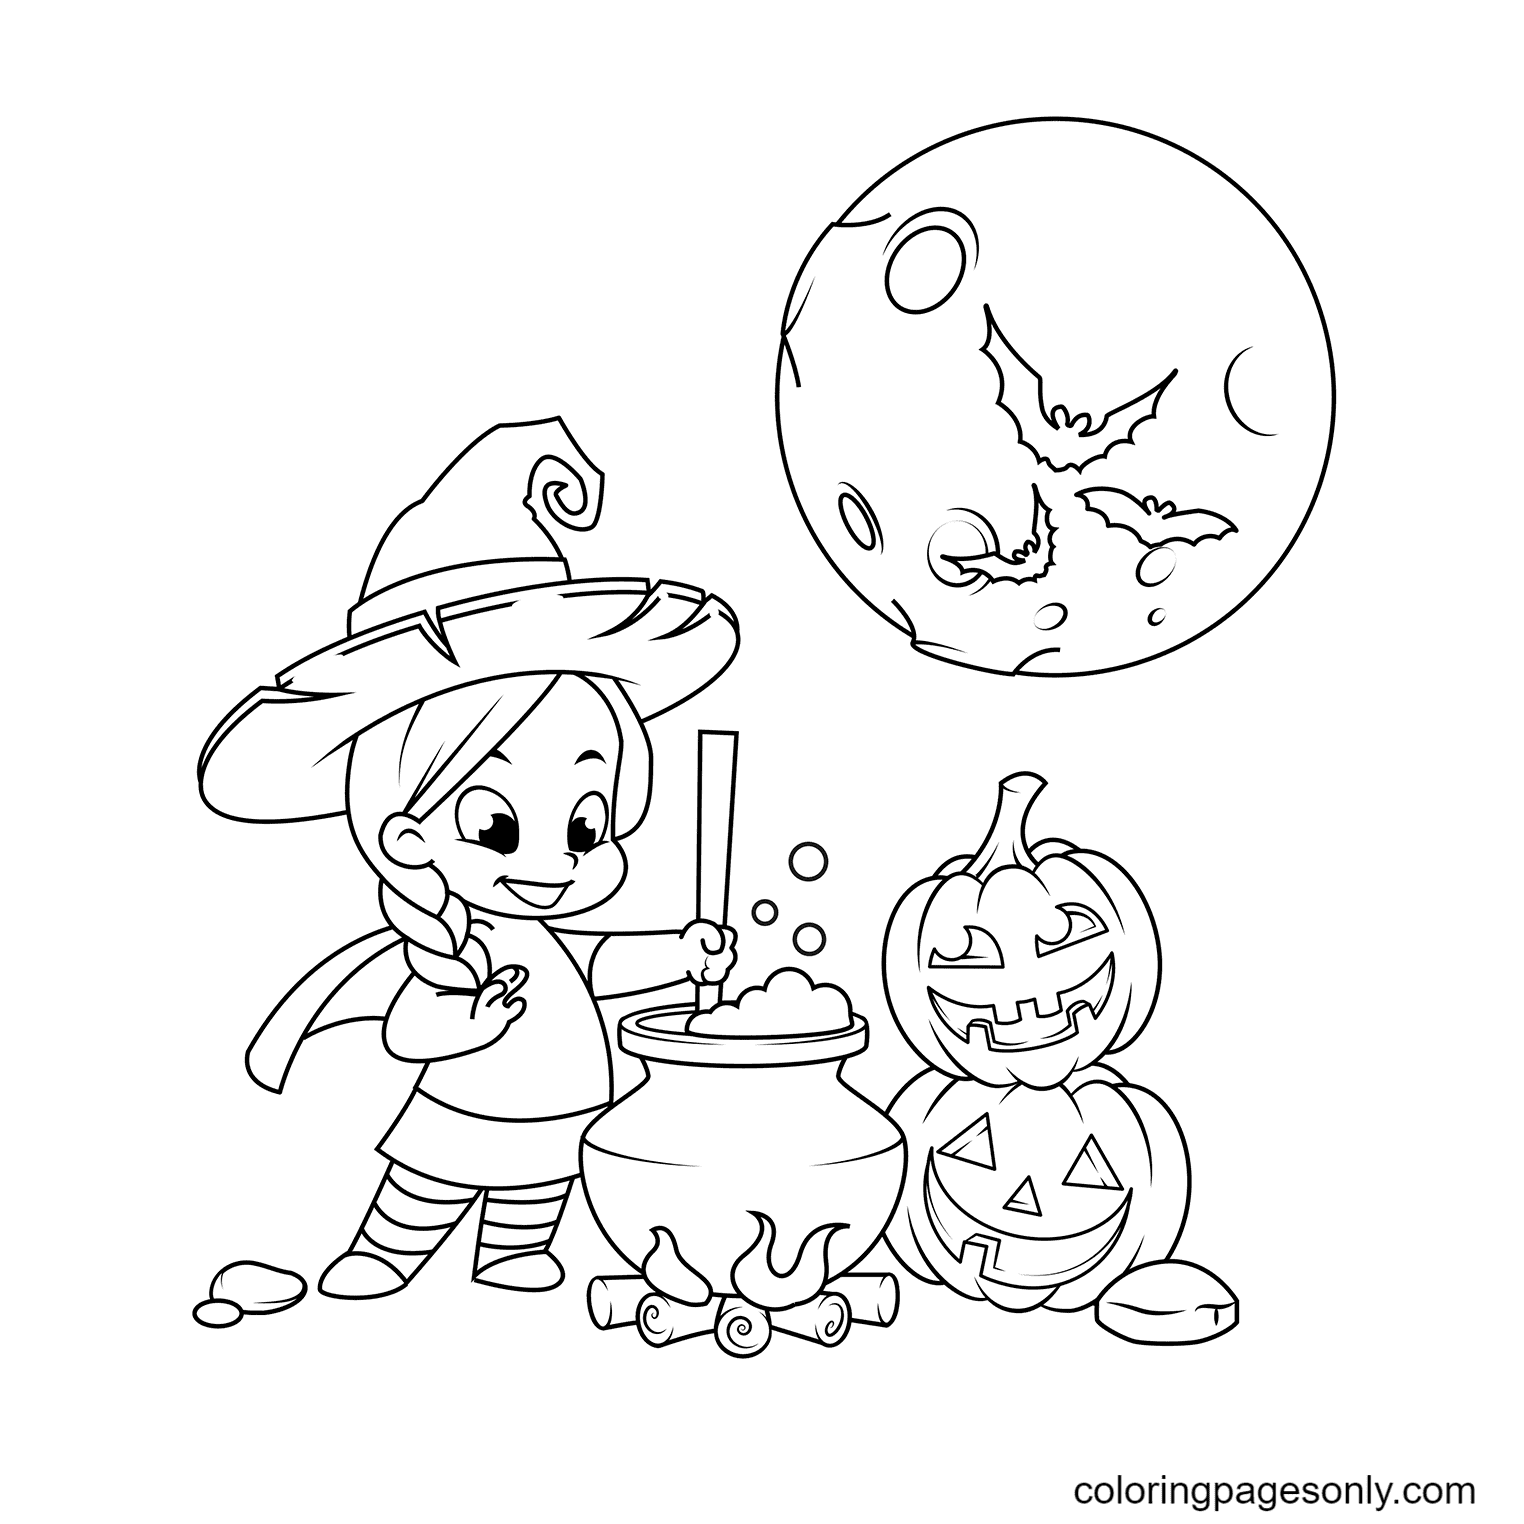 Cute Little Witch Cooking a Potion in a Cauldron from Halloween Witch